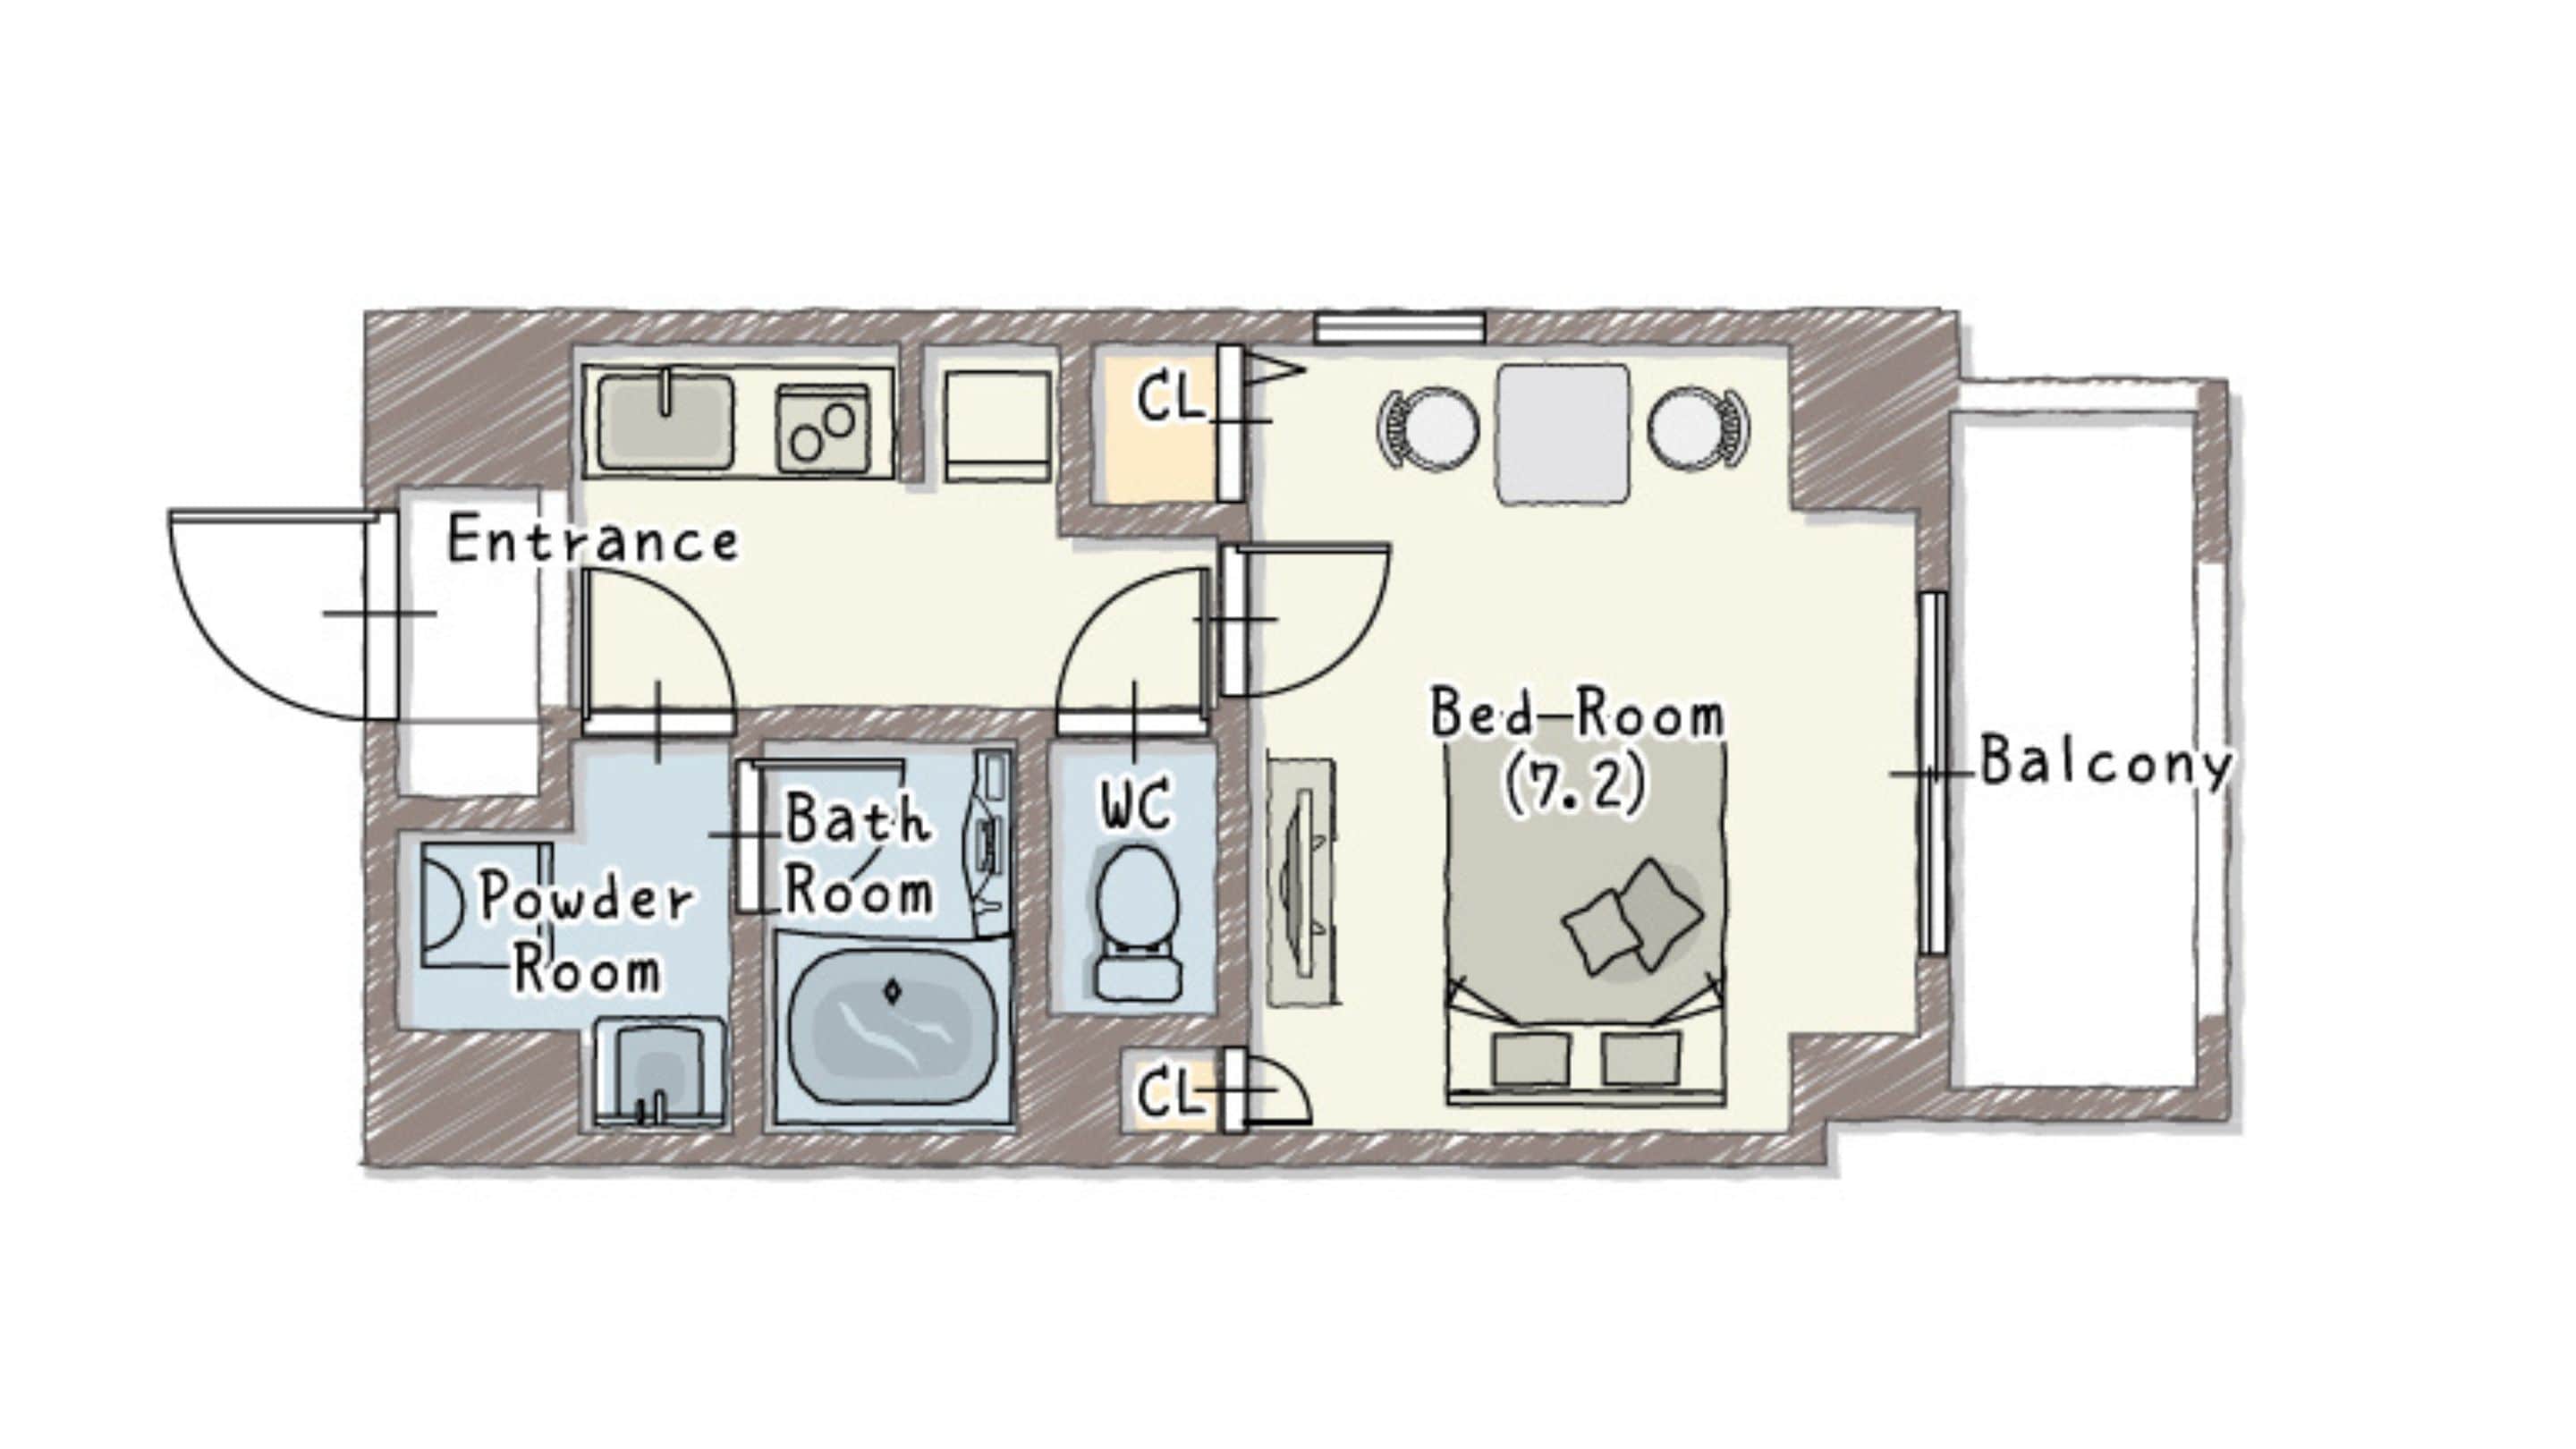 Floor plan for the superior double room.